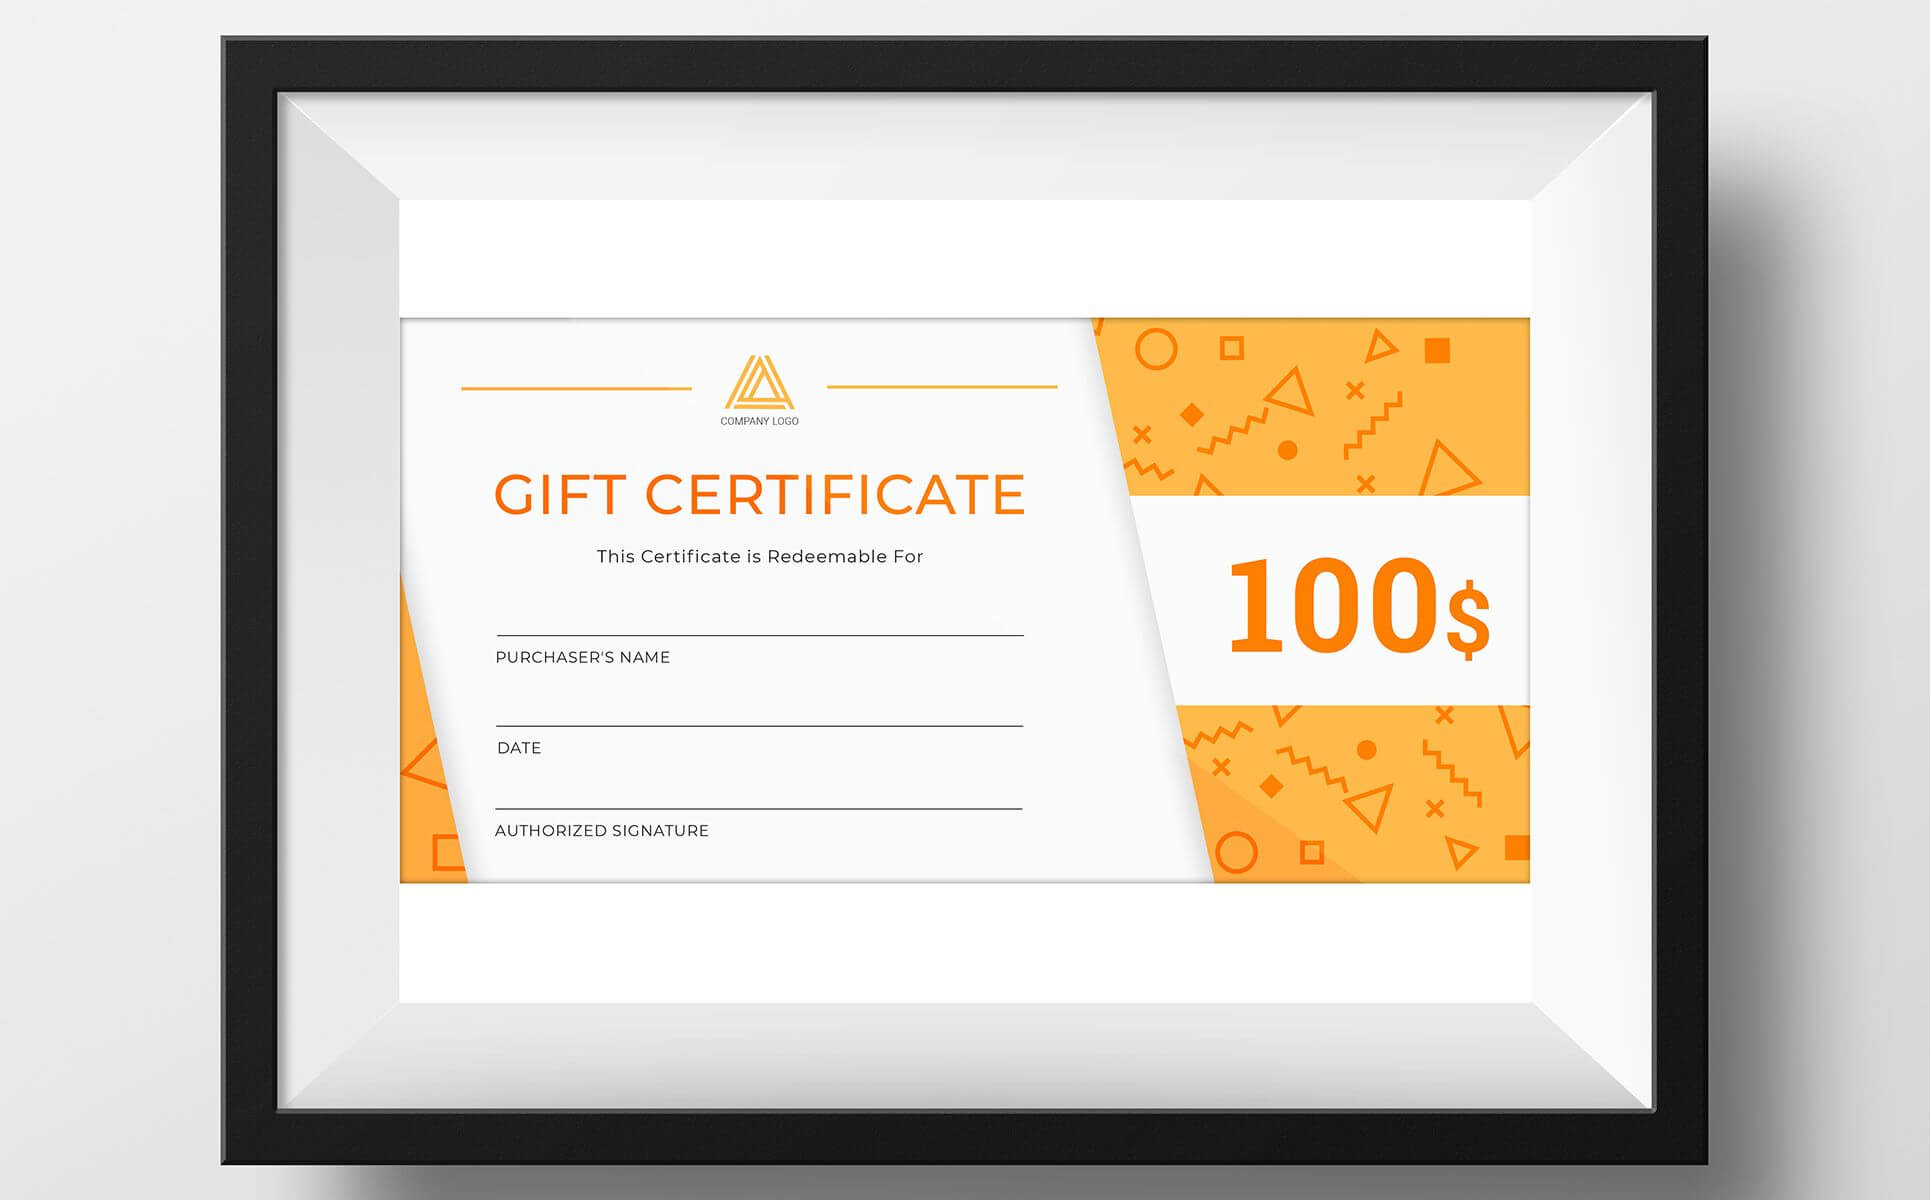 Gift Certificate Template | Design Illustration Art Pertaining To Company Gift Certificate Template